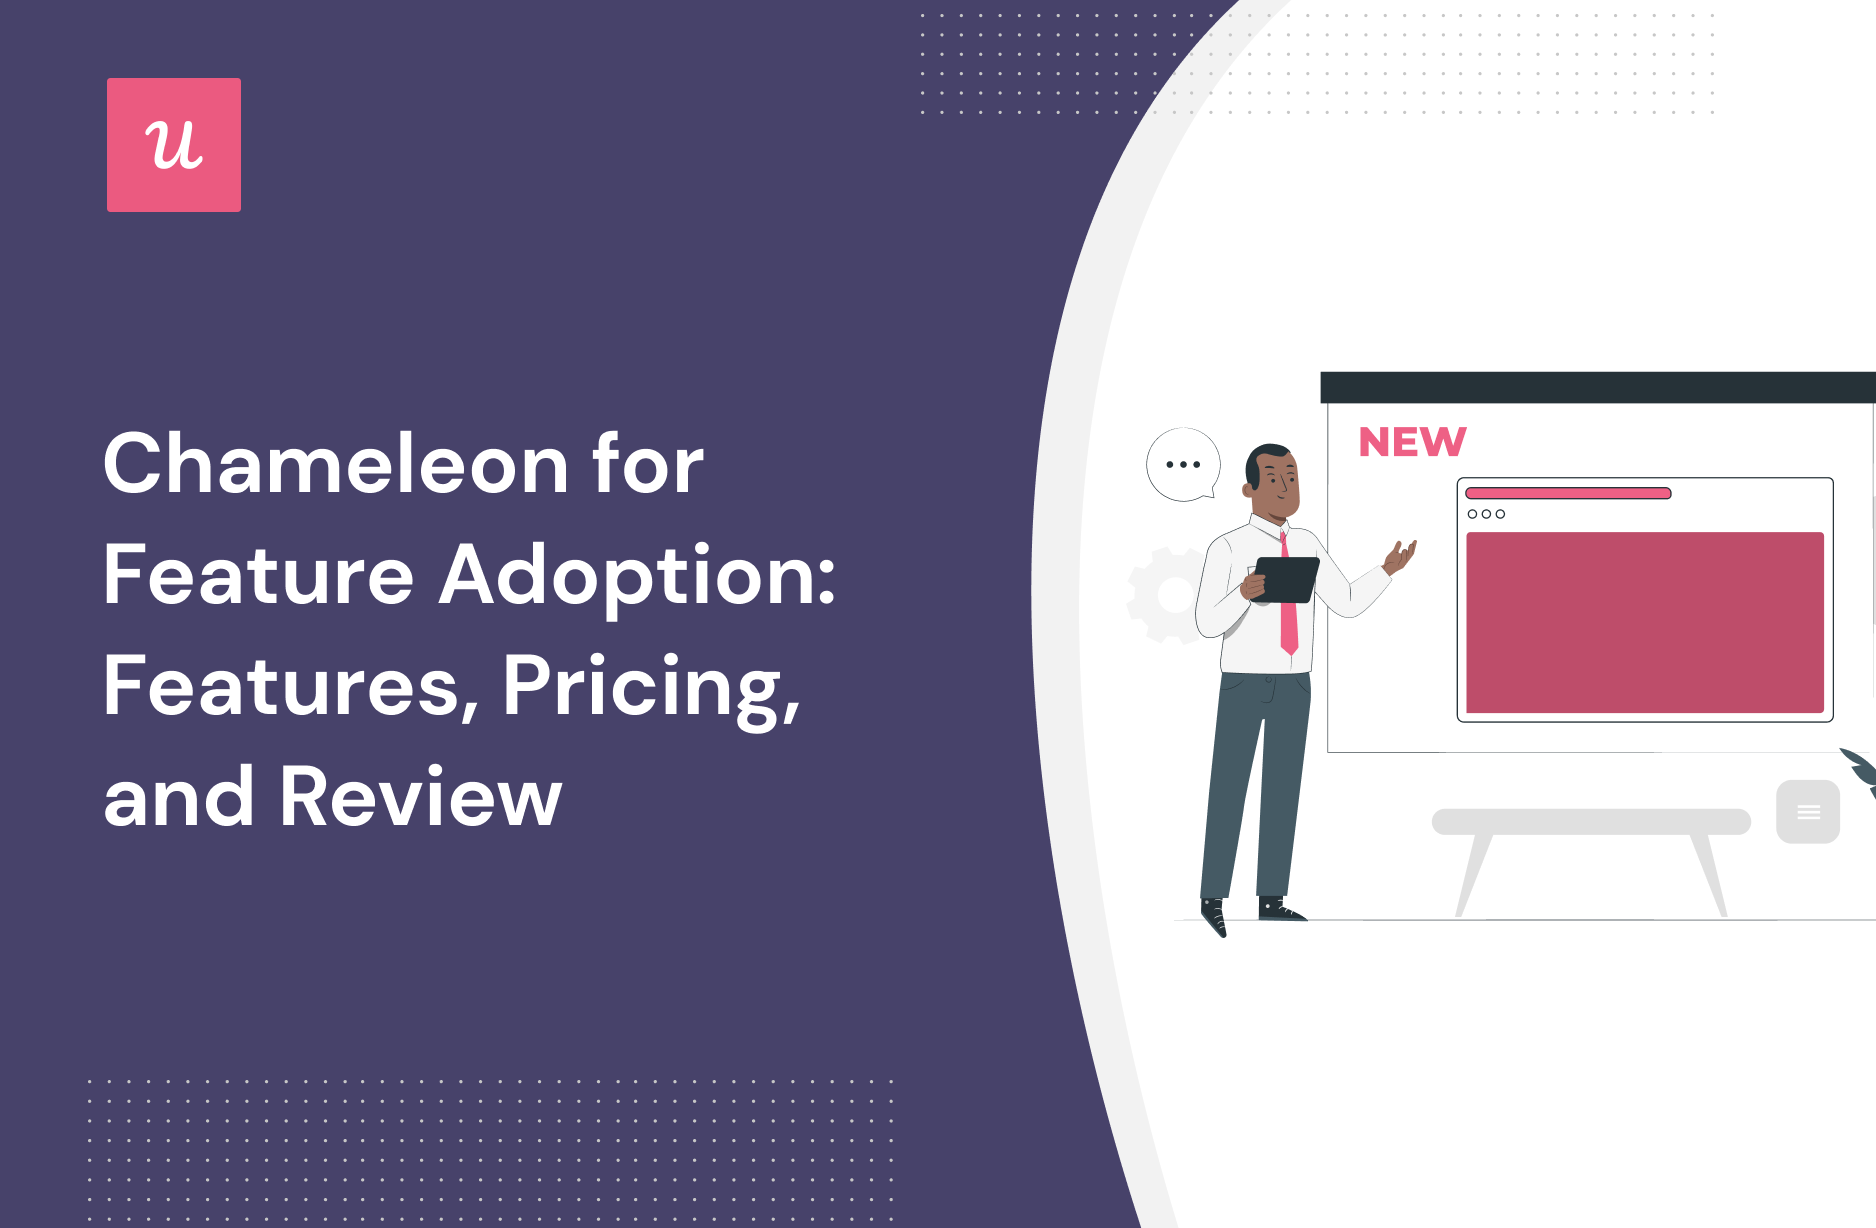 Chameleon for Feature Adoption: Features, Pricing, and Review